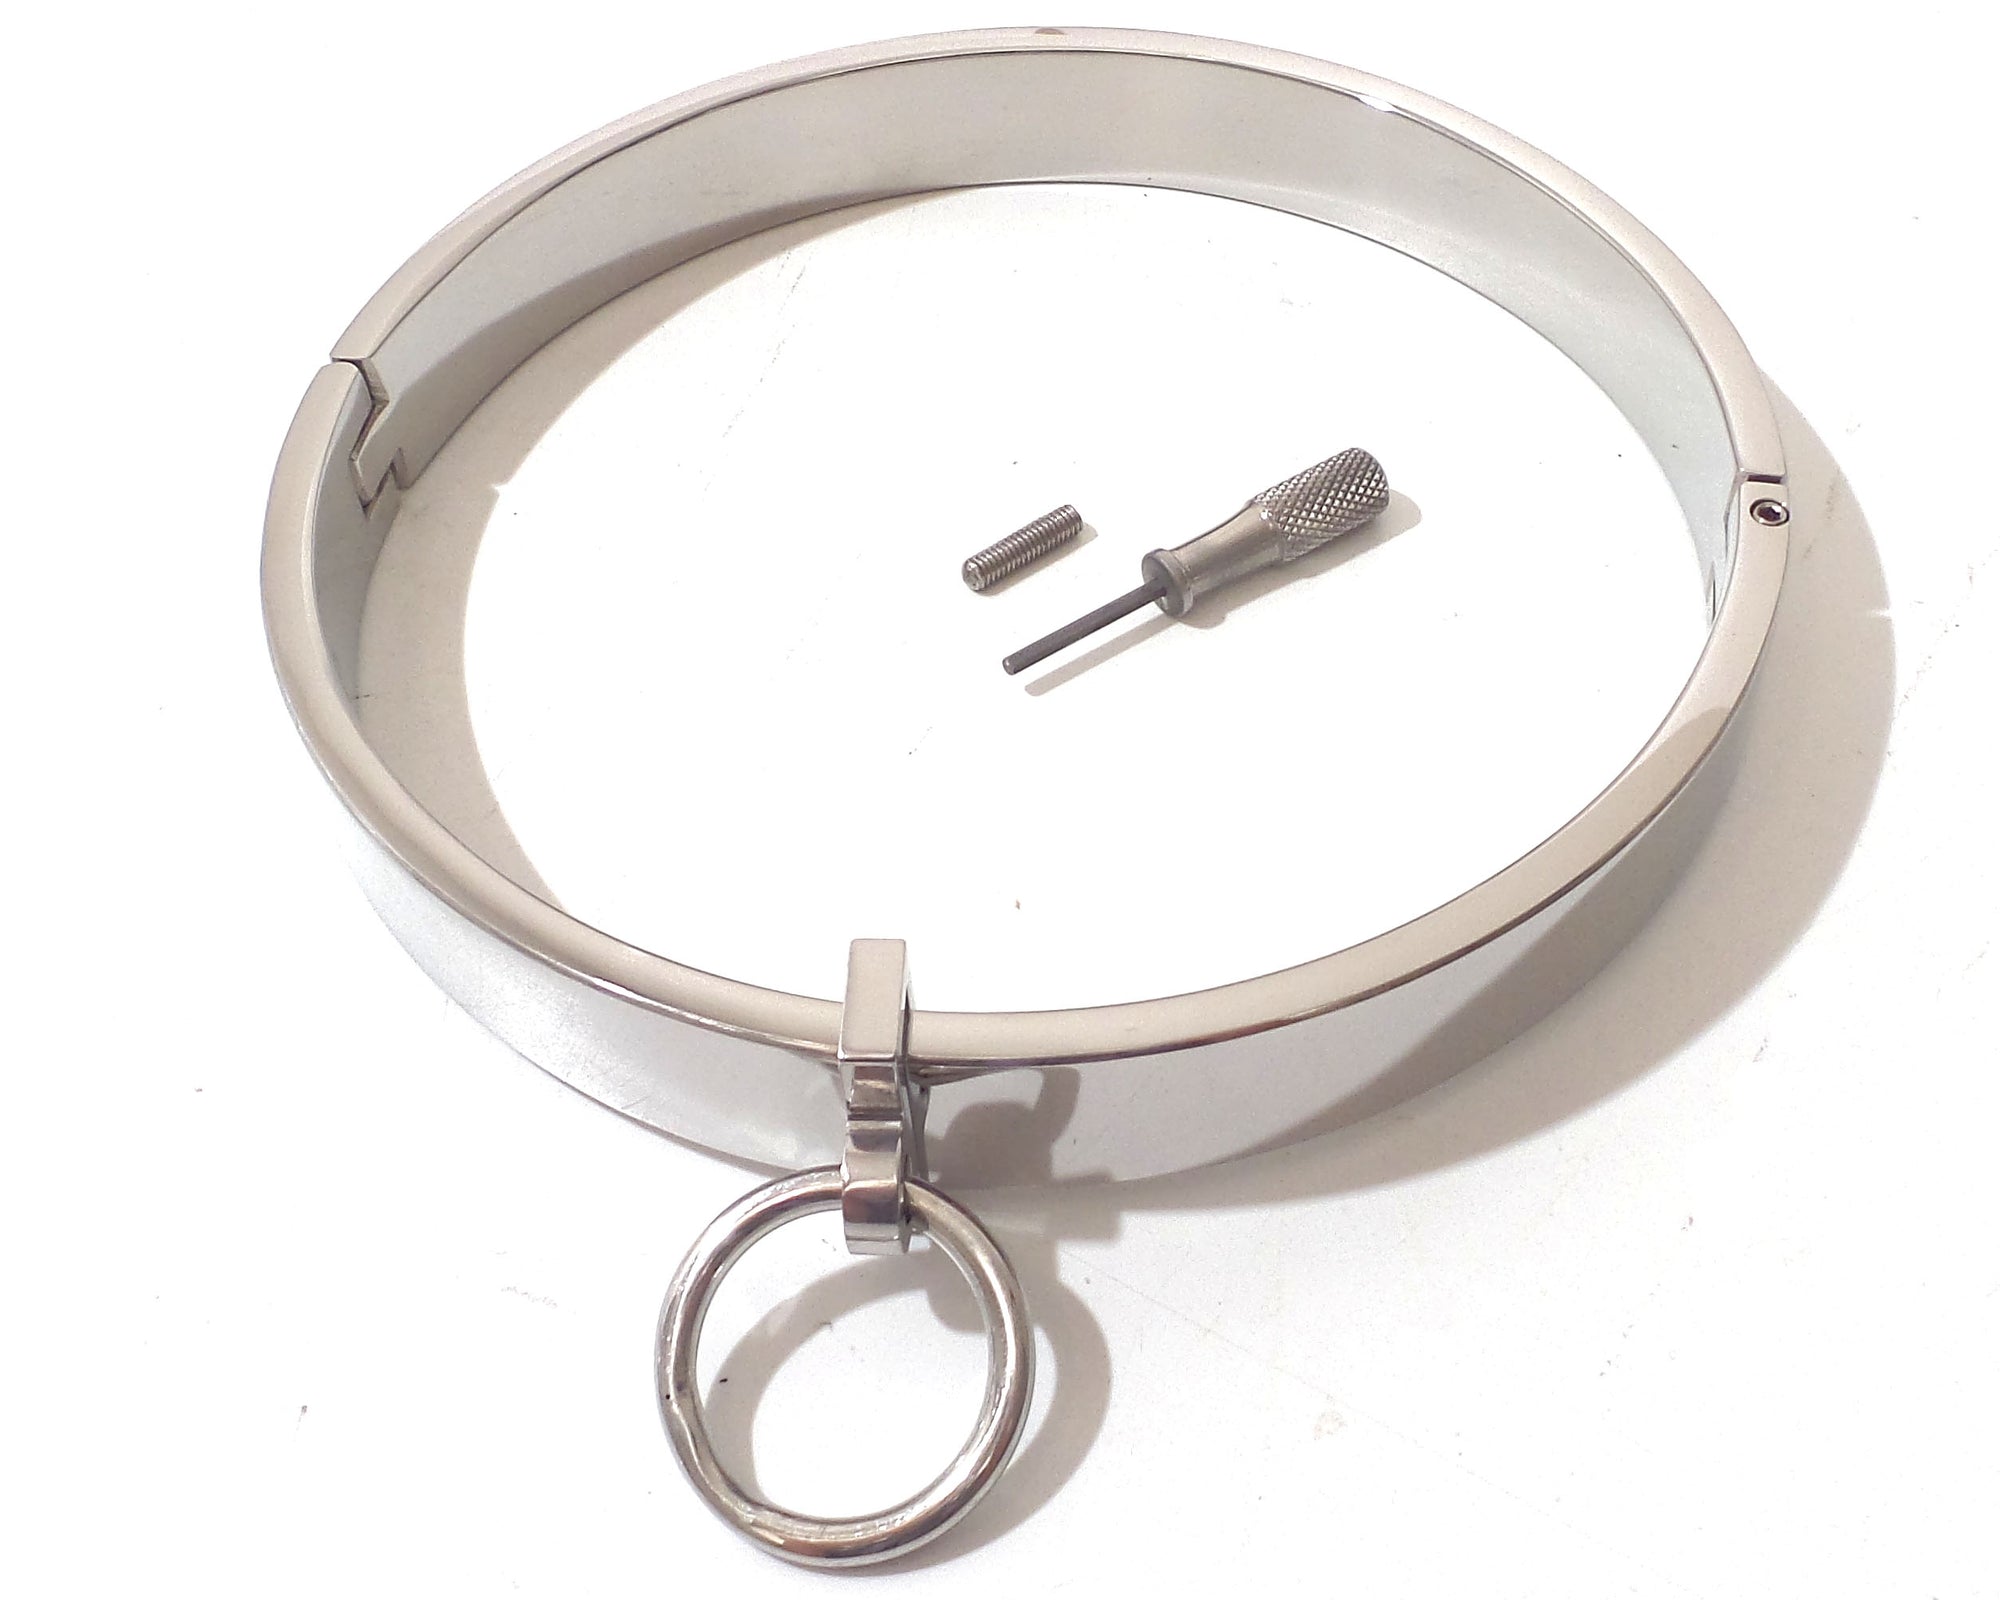 Heavy Locking  Stainless Steel Collar with Removable Ring Eternity Collar Size  XL and  XXL